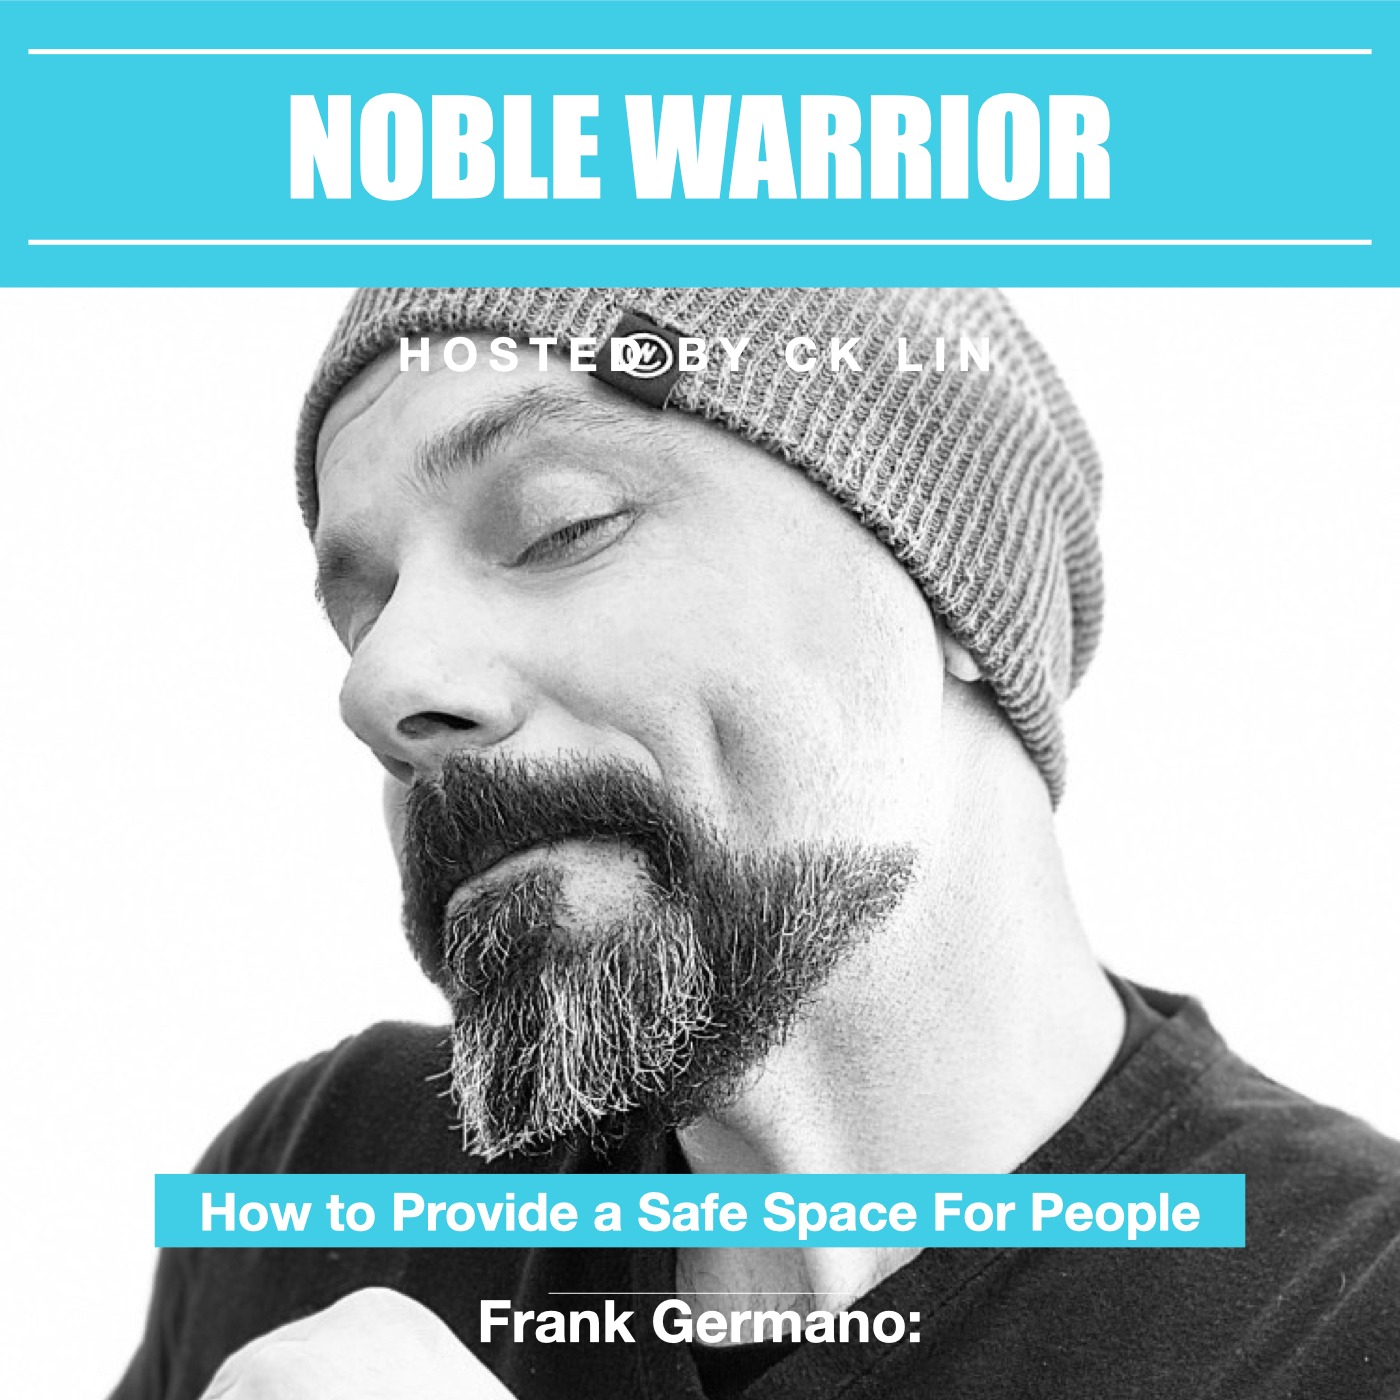 010 Frank Germano: How to Provide a Safe Space For People Image